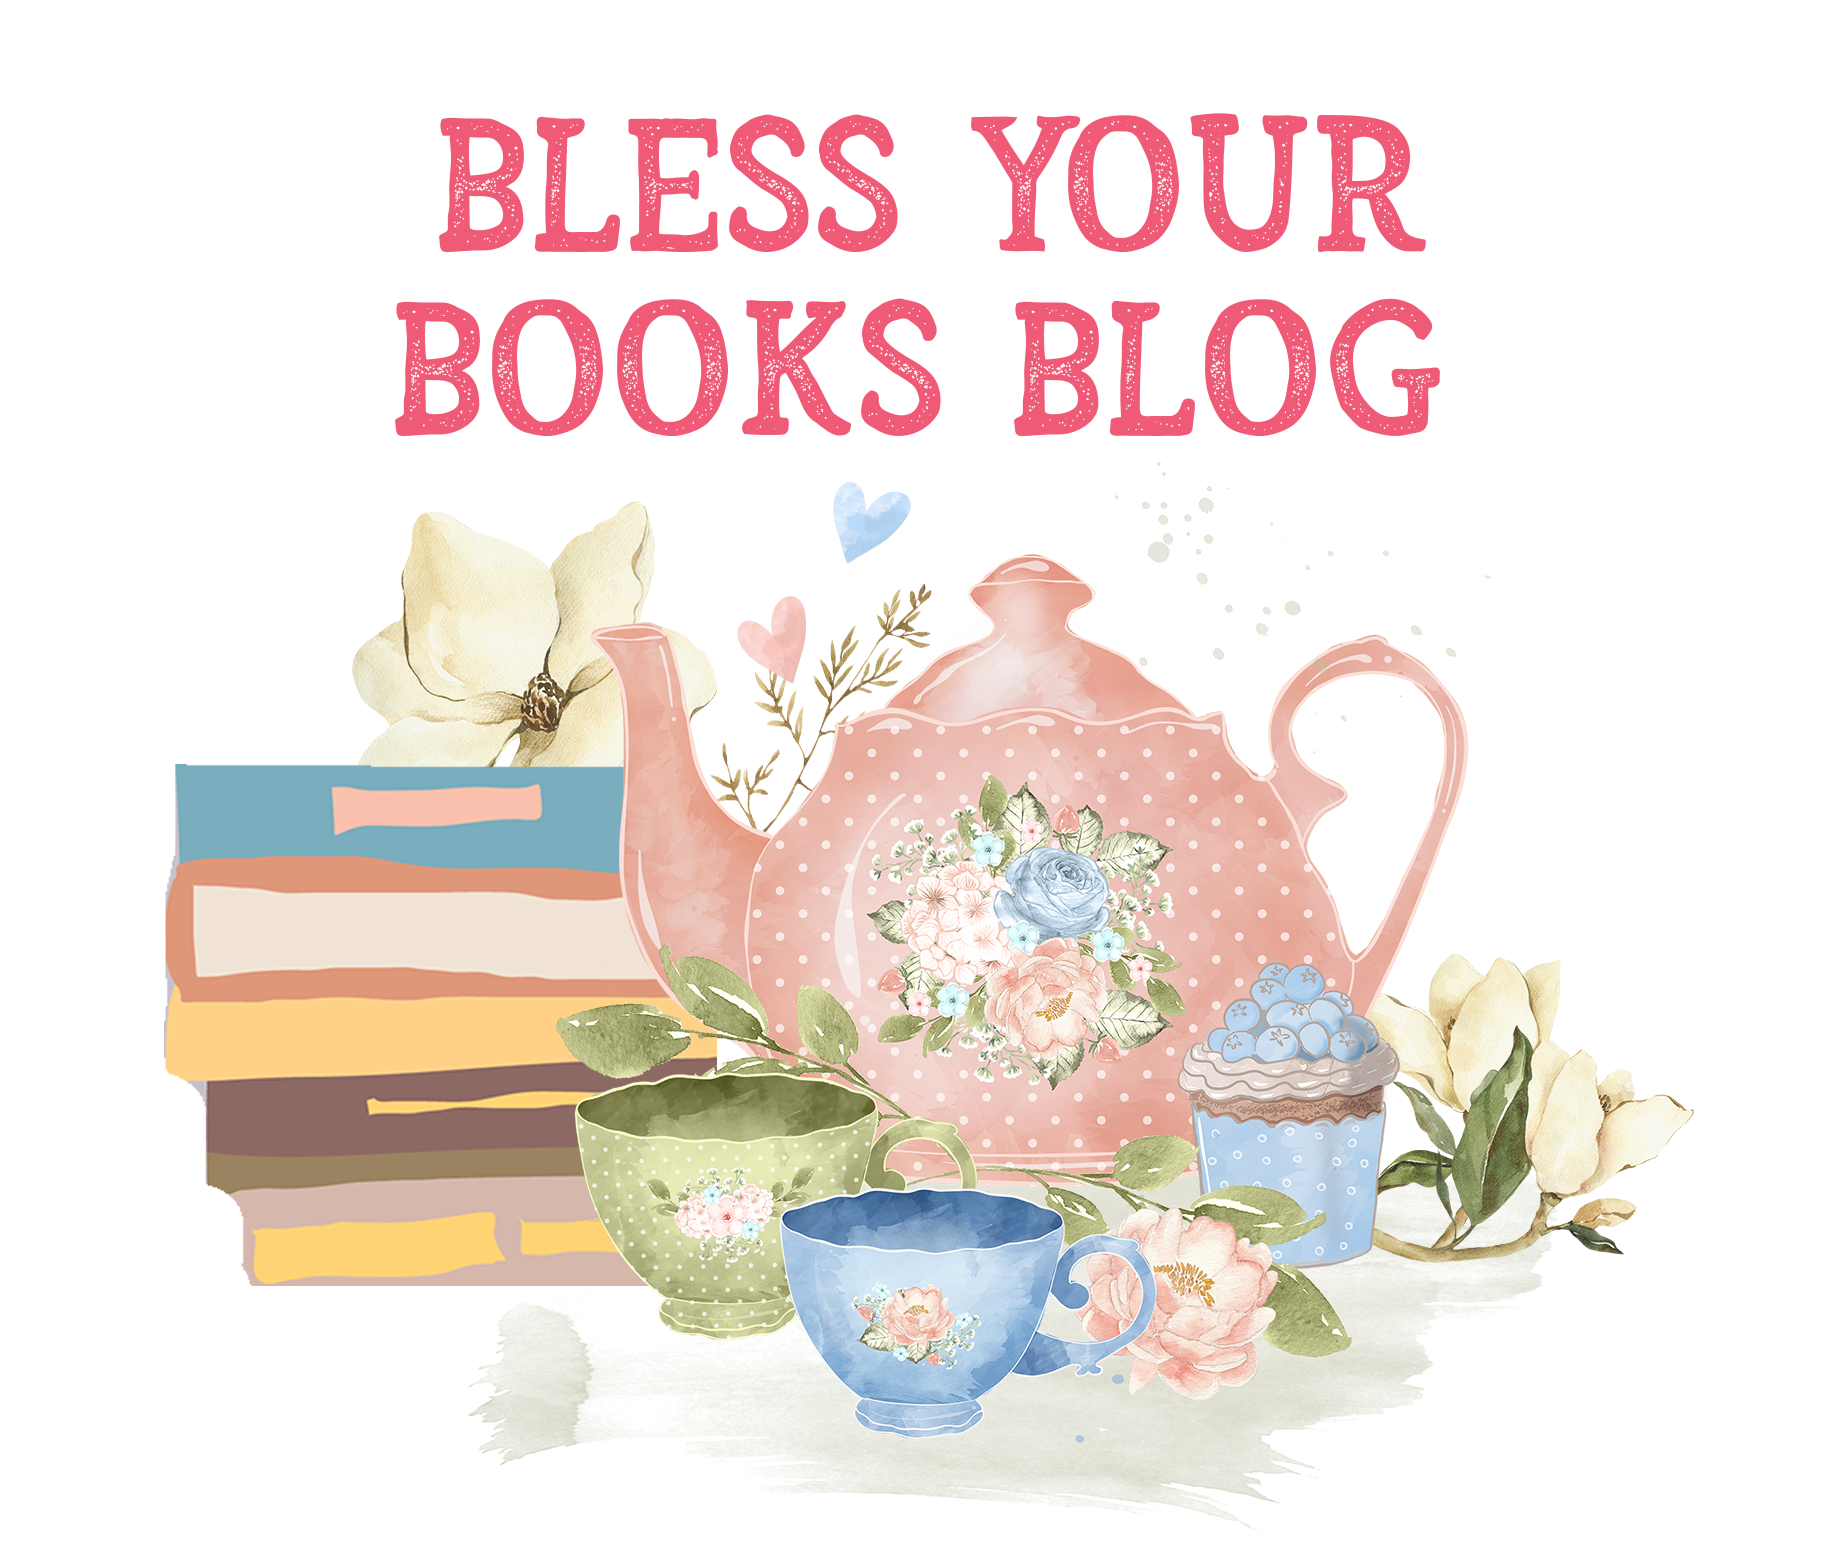 Bless Your Books Blog